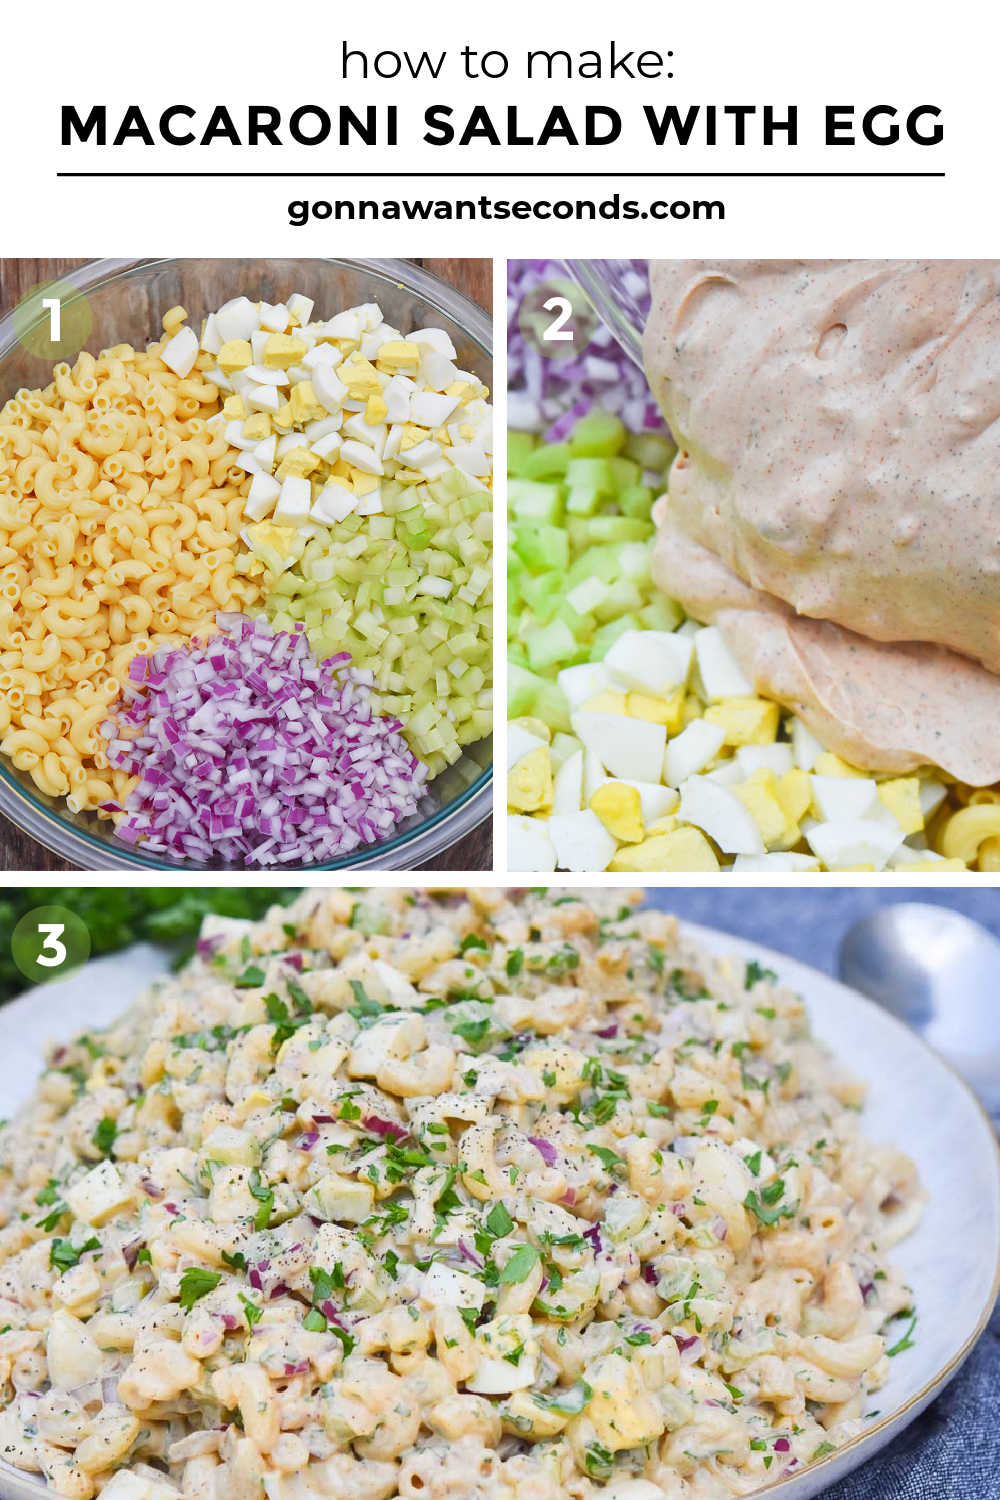 Step by step how to make macaroni salad with egg